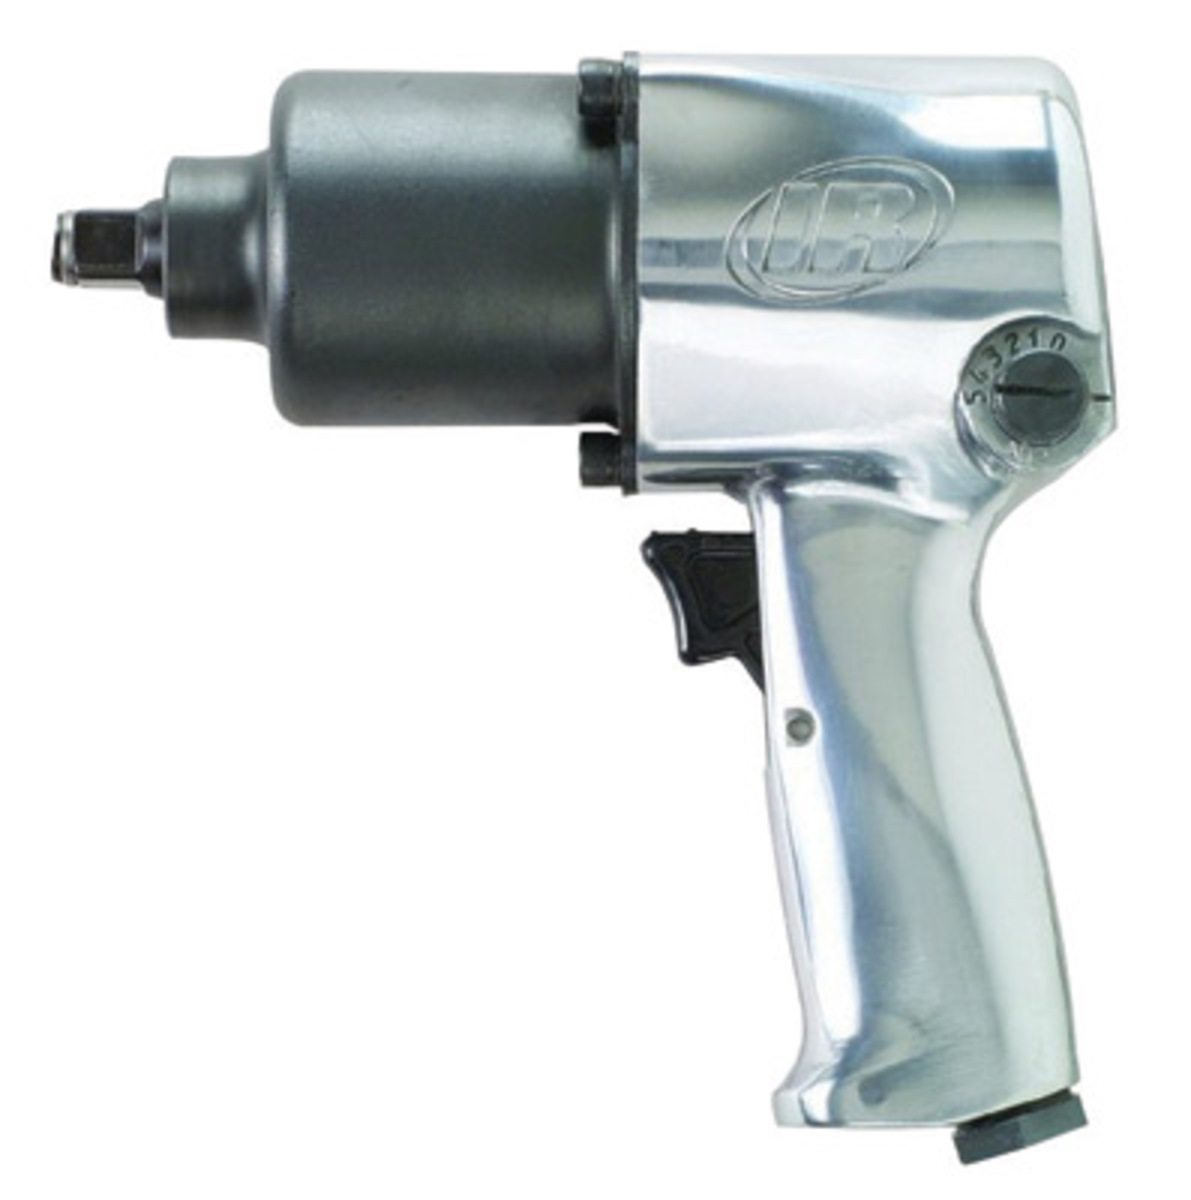 Ingersoll-Rand Ingersoll Rand 3/8” Drive  Air Impact Wrench 5020 